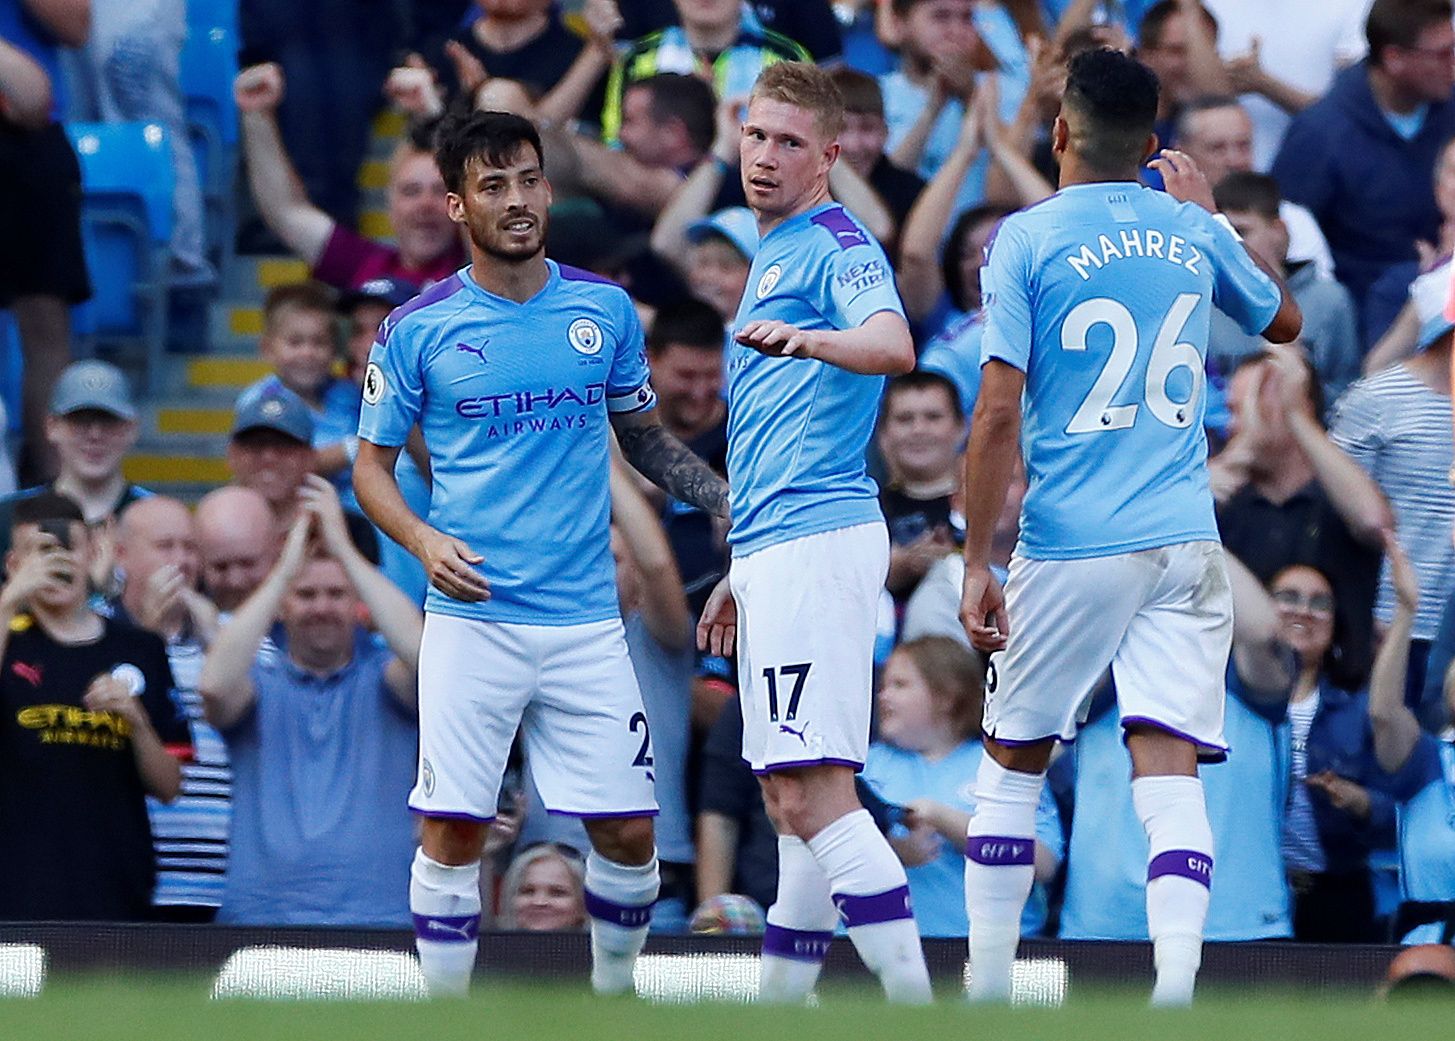 Soccer Football - Premier League - Manchester City v Watford - Etihad Stadium, Manchester, Britain - September 21, 2019  Manchester City's Kevin De Bruyne celebrates scoring their eighth goal with teammates David Silva and Riyad Mahrez   Action Images via Reuters/Jason Cairnduff  EDITORIAL USE ONLY. No use with unauthorized audio, video, data, fixture lists, club/league logos or "live" services. Online in-match use limited to 75 images, no video emulation. No use in betting, games or single club